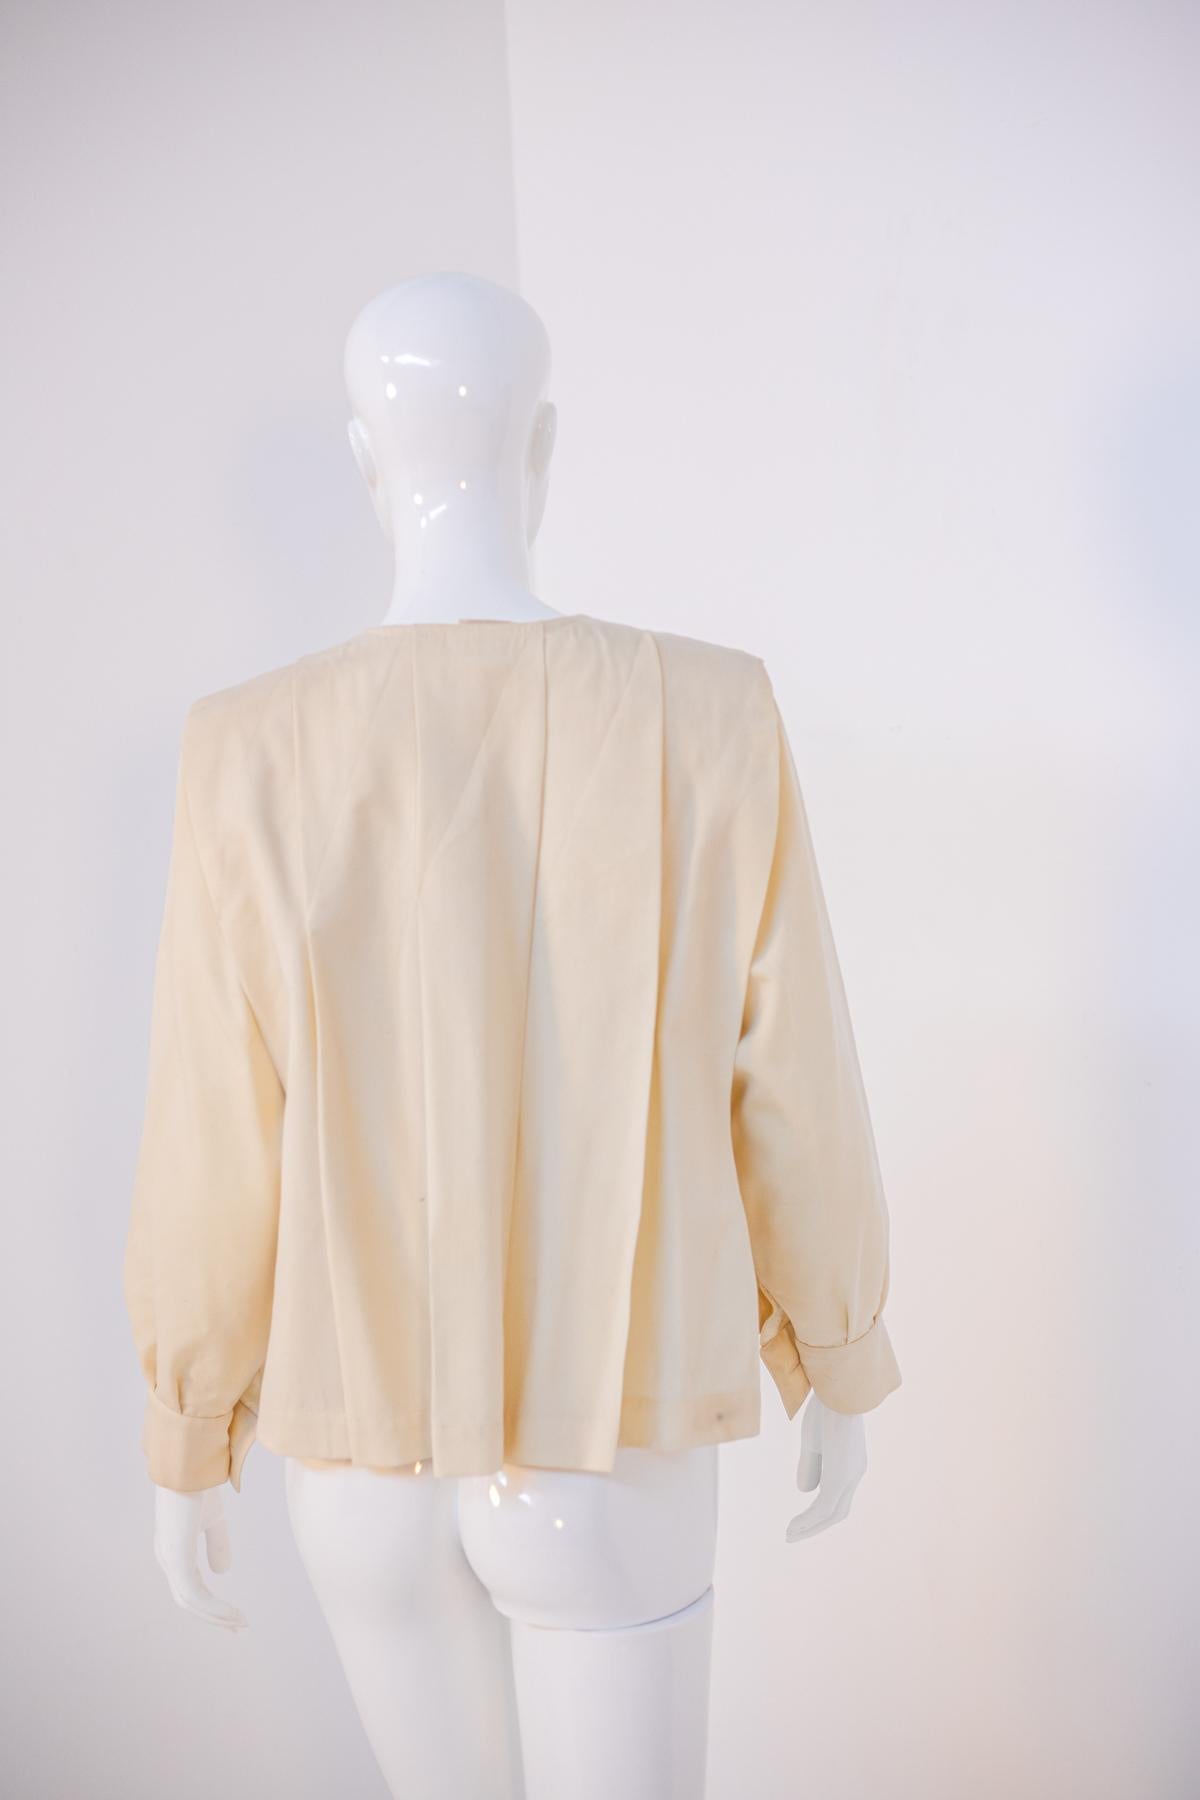 Krizia Chic Pleated Wool Blouse For Sale 3